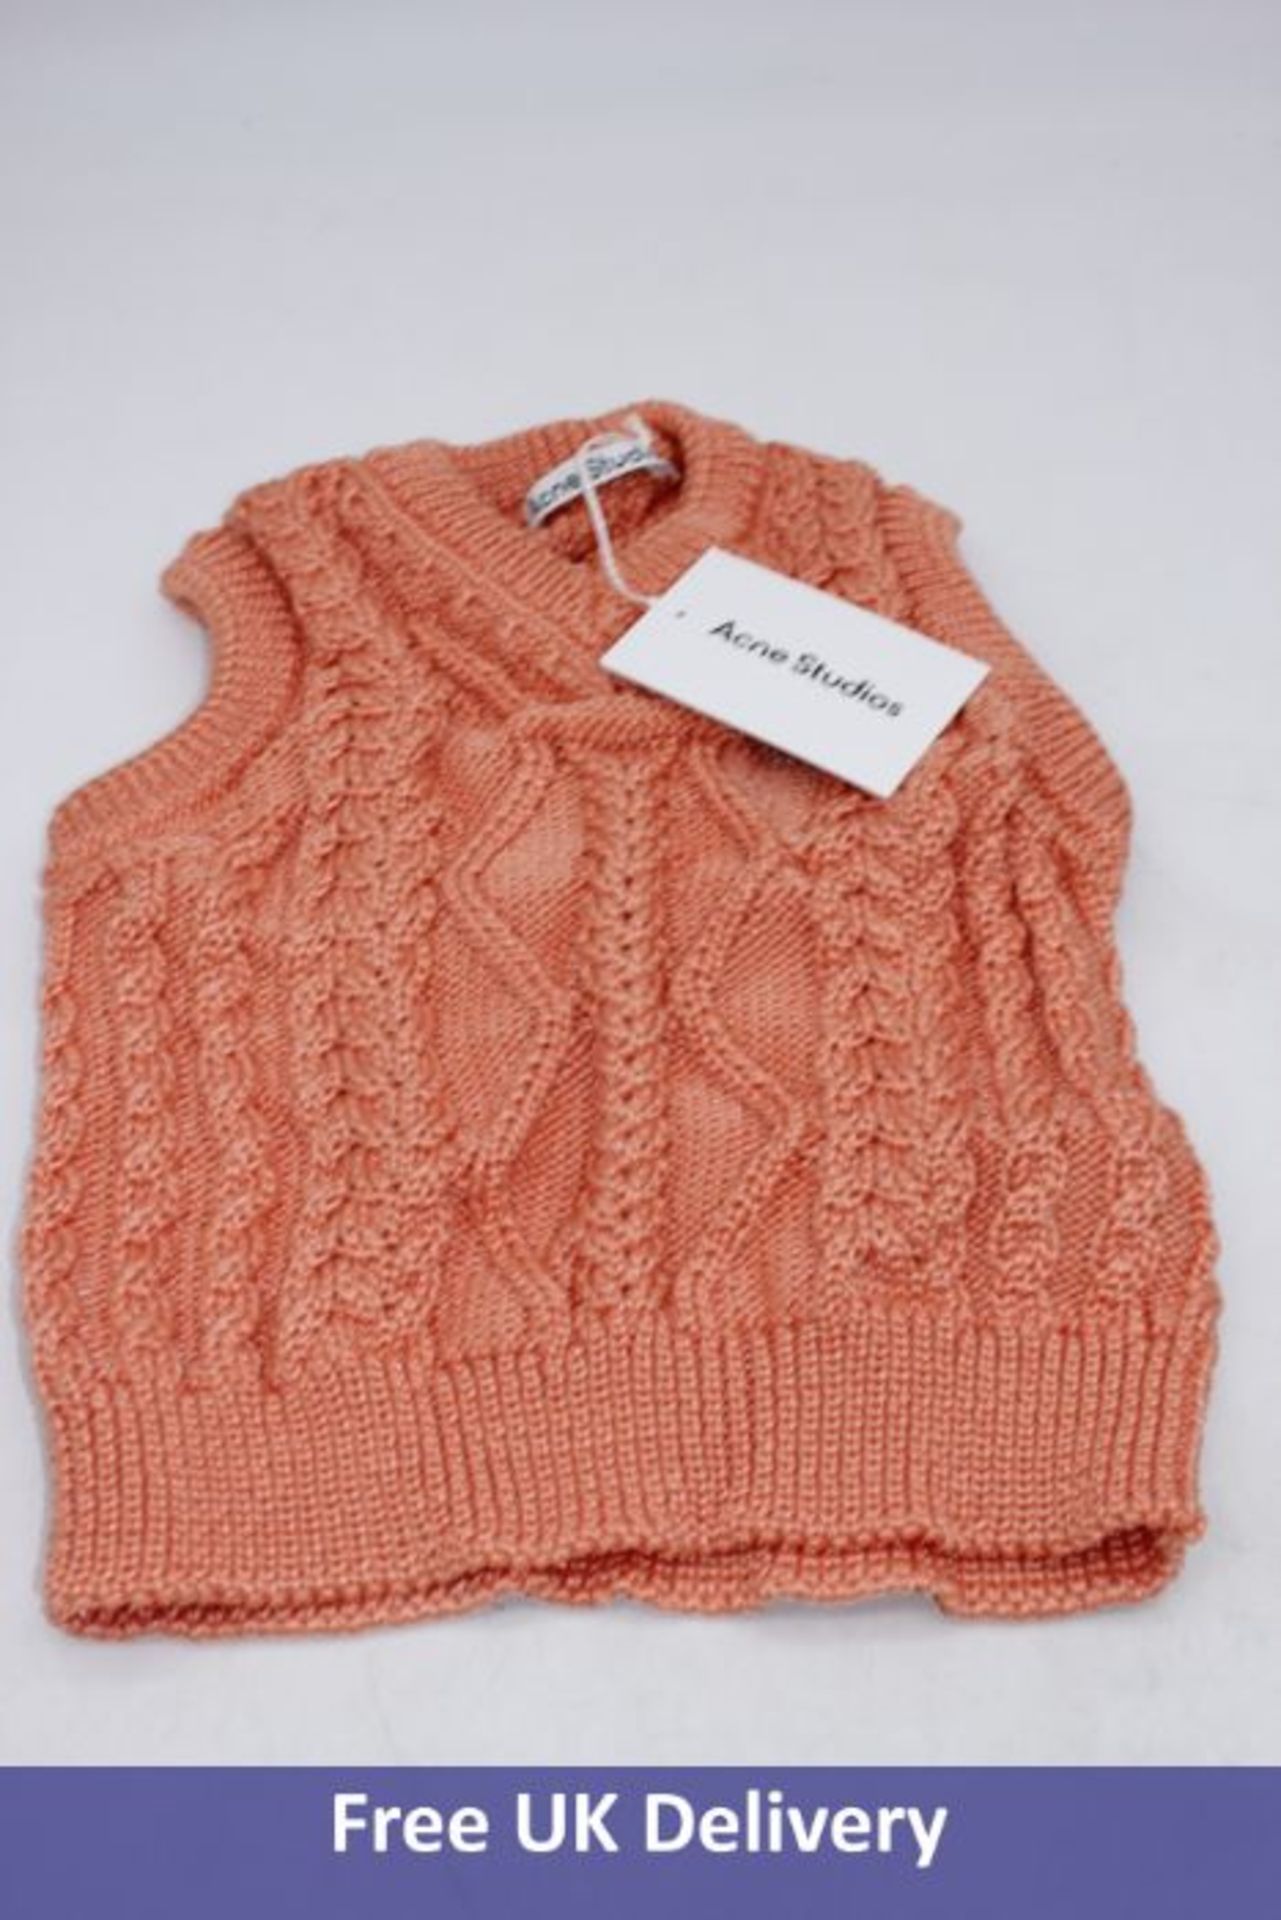 Four items of Acne Studios Women's Clothing to include 1x Sweater, Optic White, XXS, 1x Knit Cardiga - Image 3 of 3